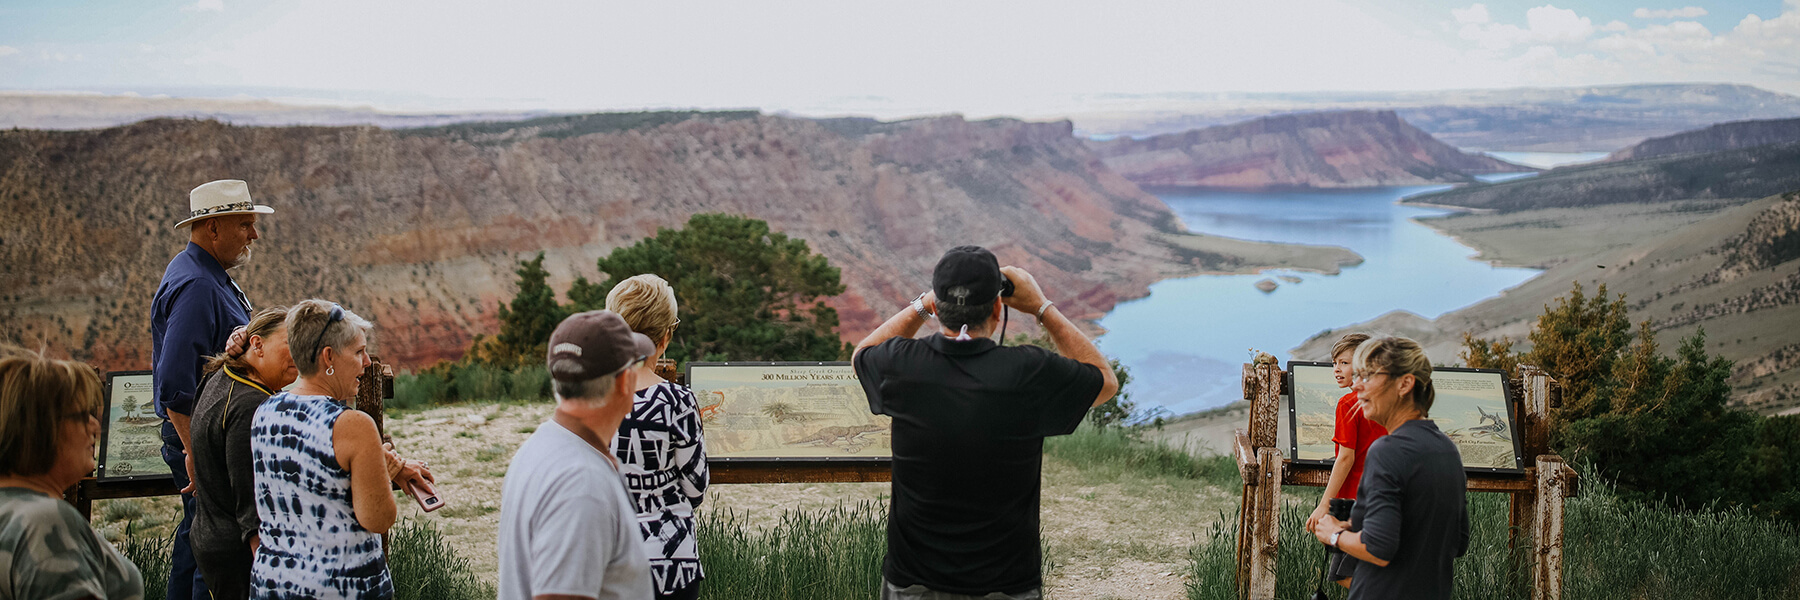 Visitors enjoying the scenic overlooks in Flaming Gorge National Recreation Area